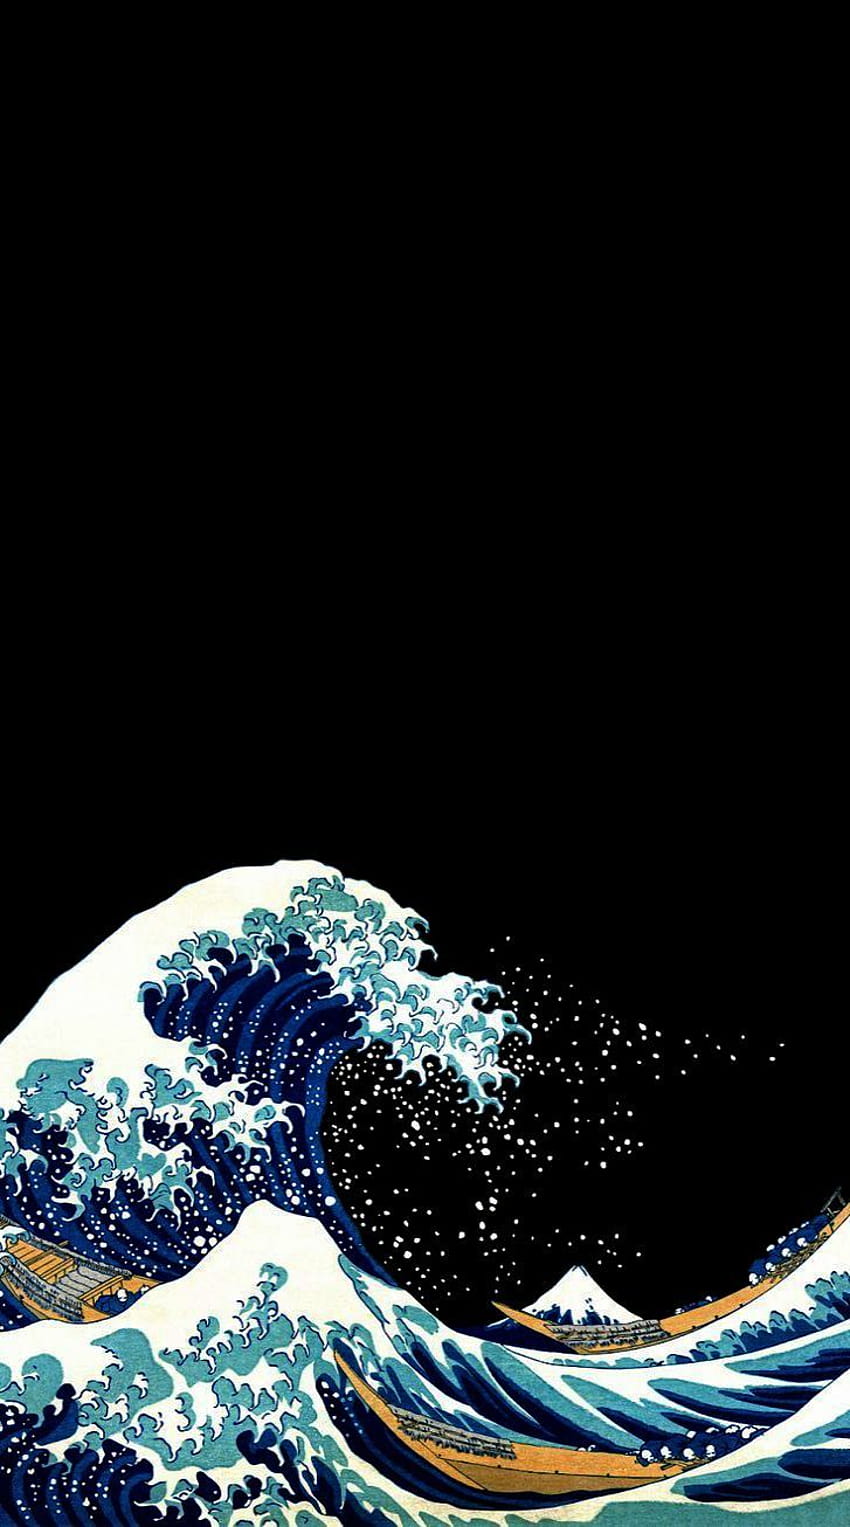 indie backgrounds for iphone